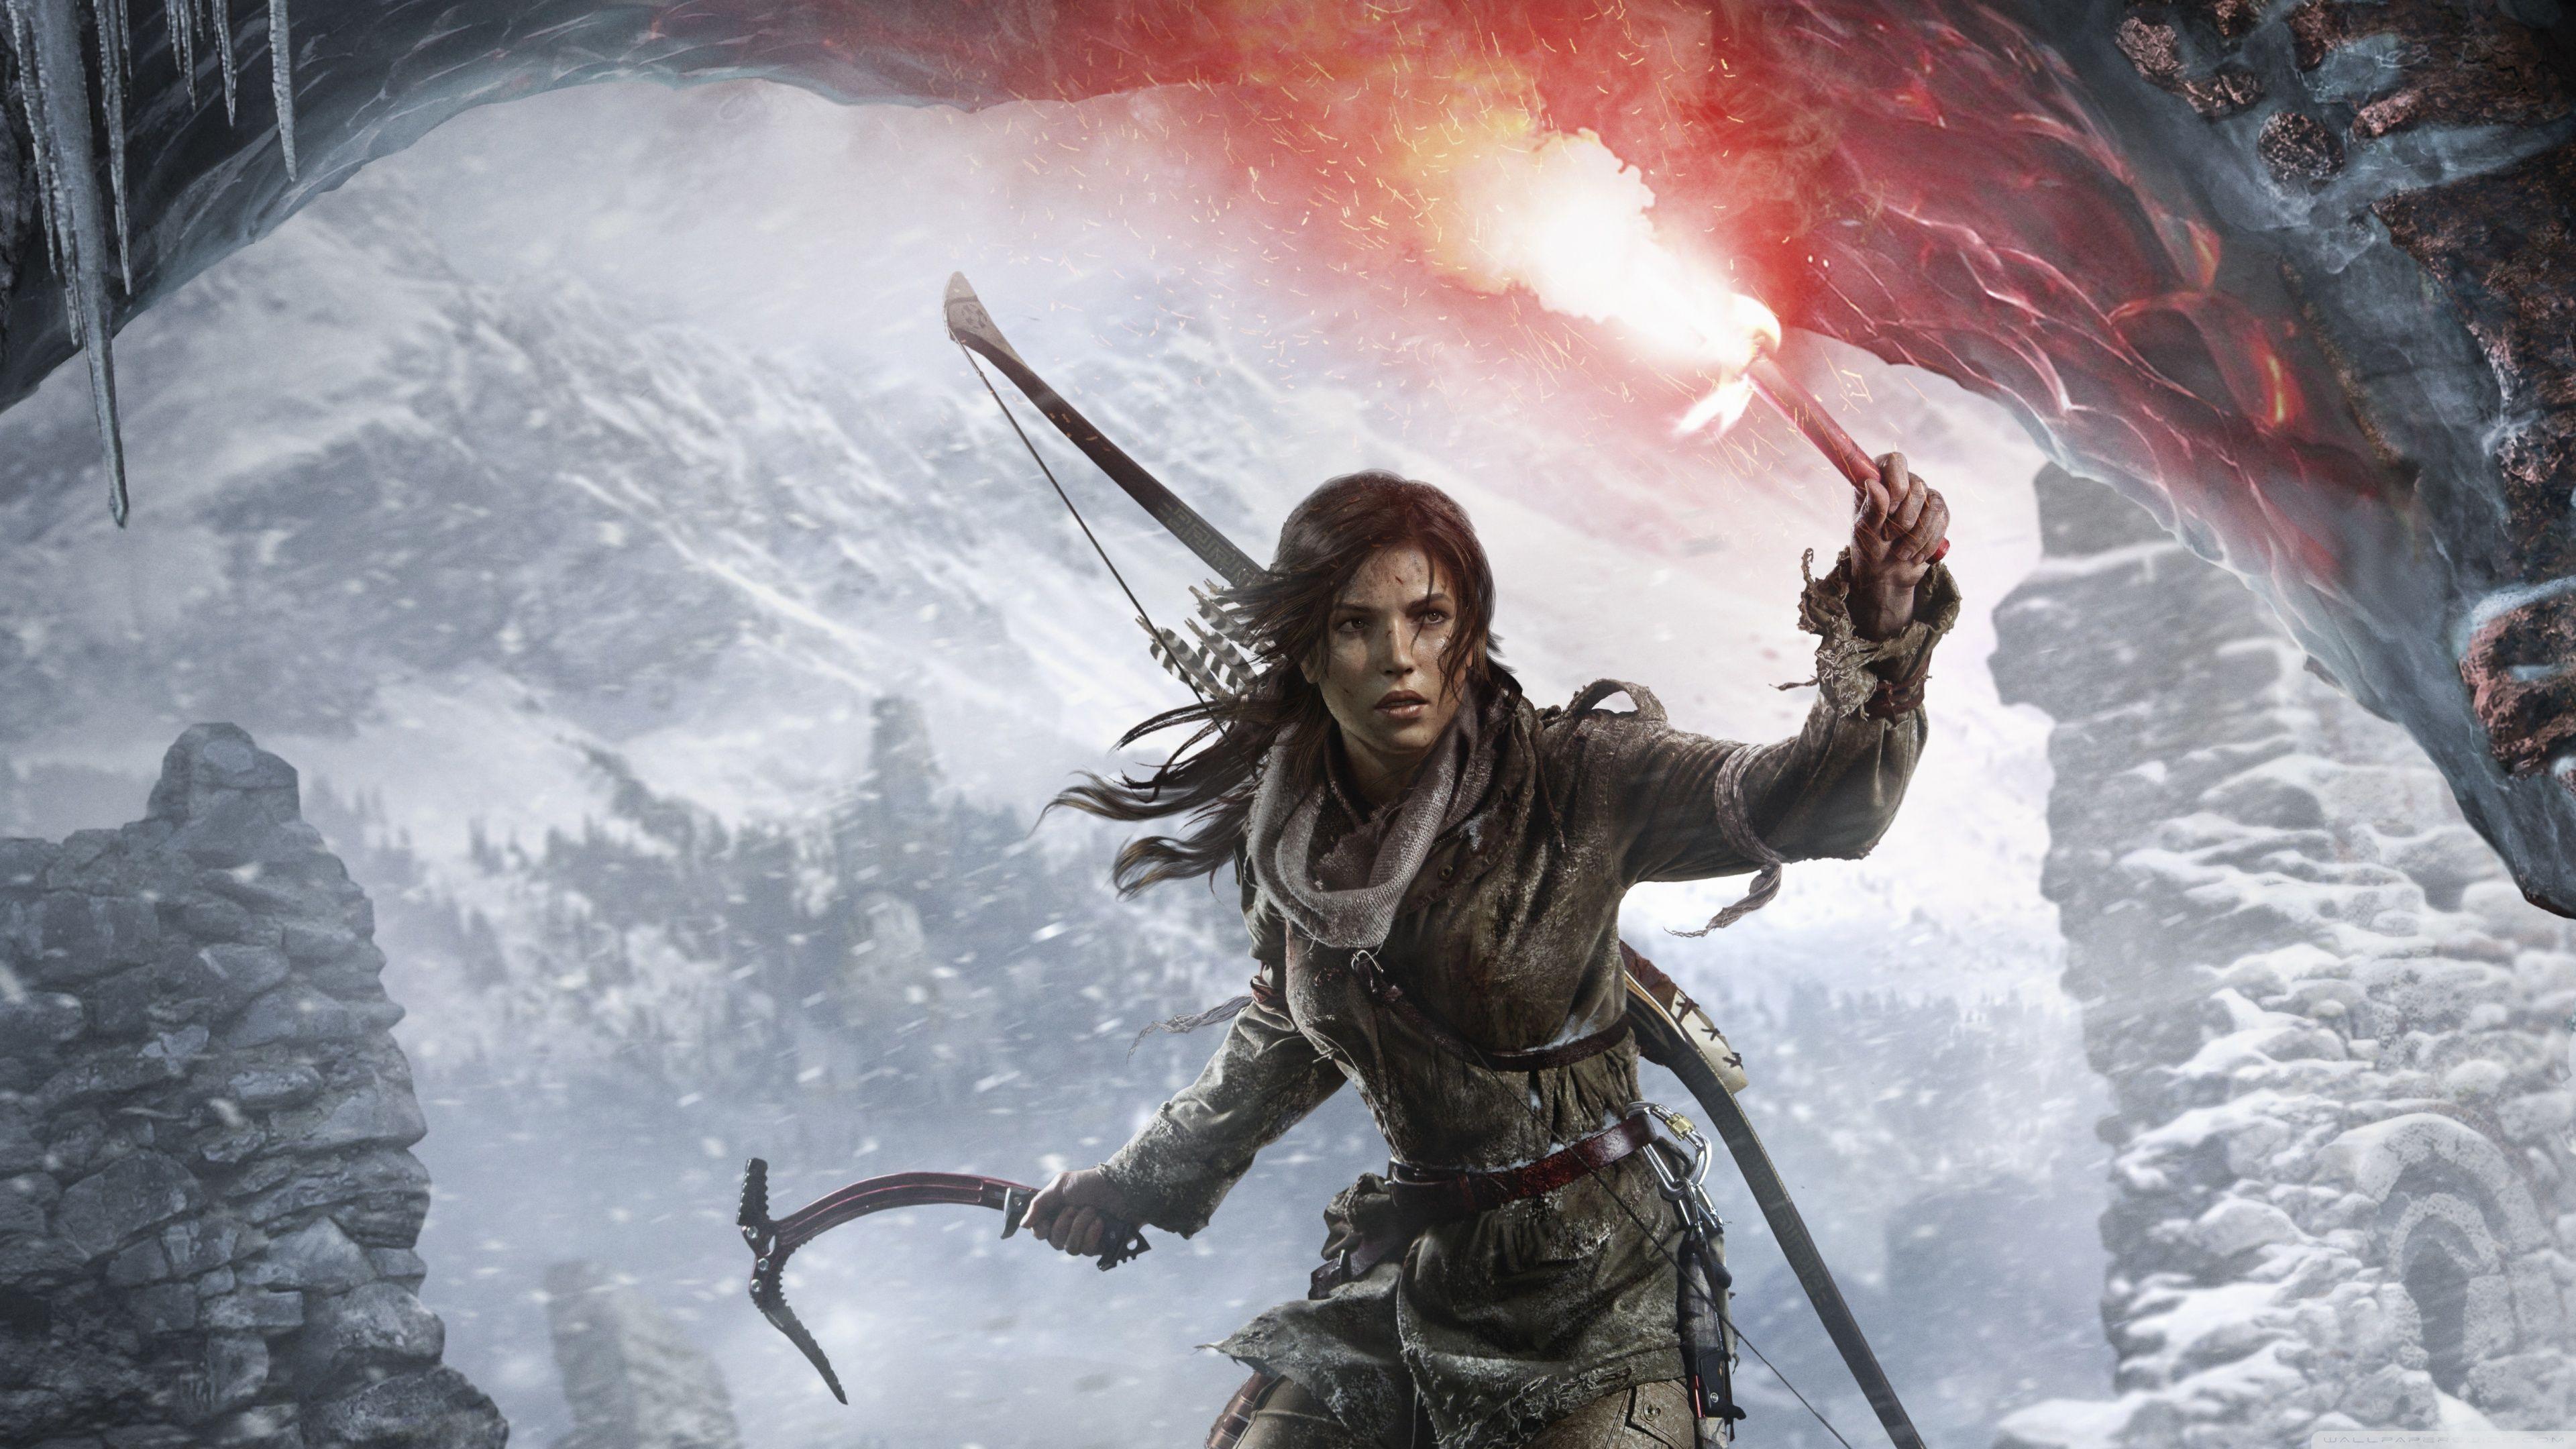 Rise Of The Tomb Raider Journey HD desktop wallpapers : Widescreen